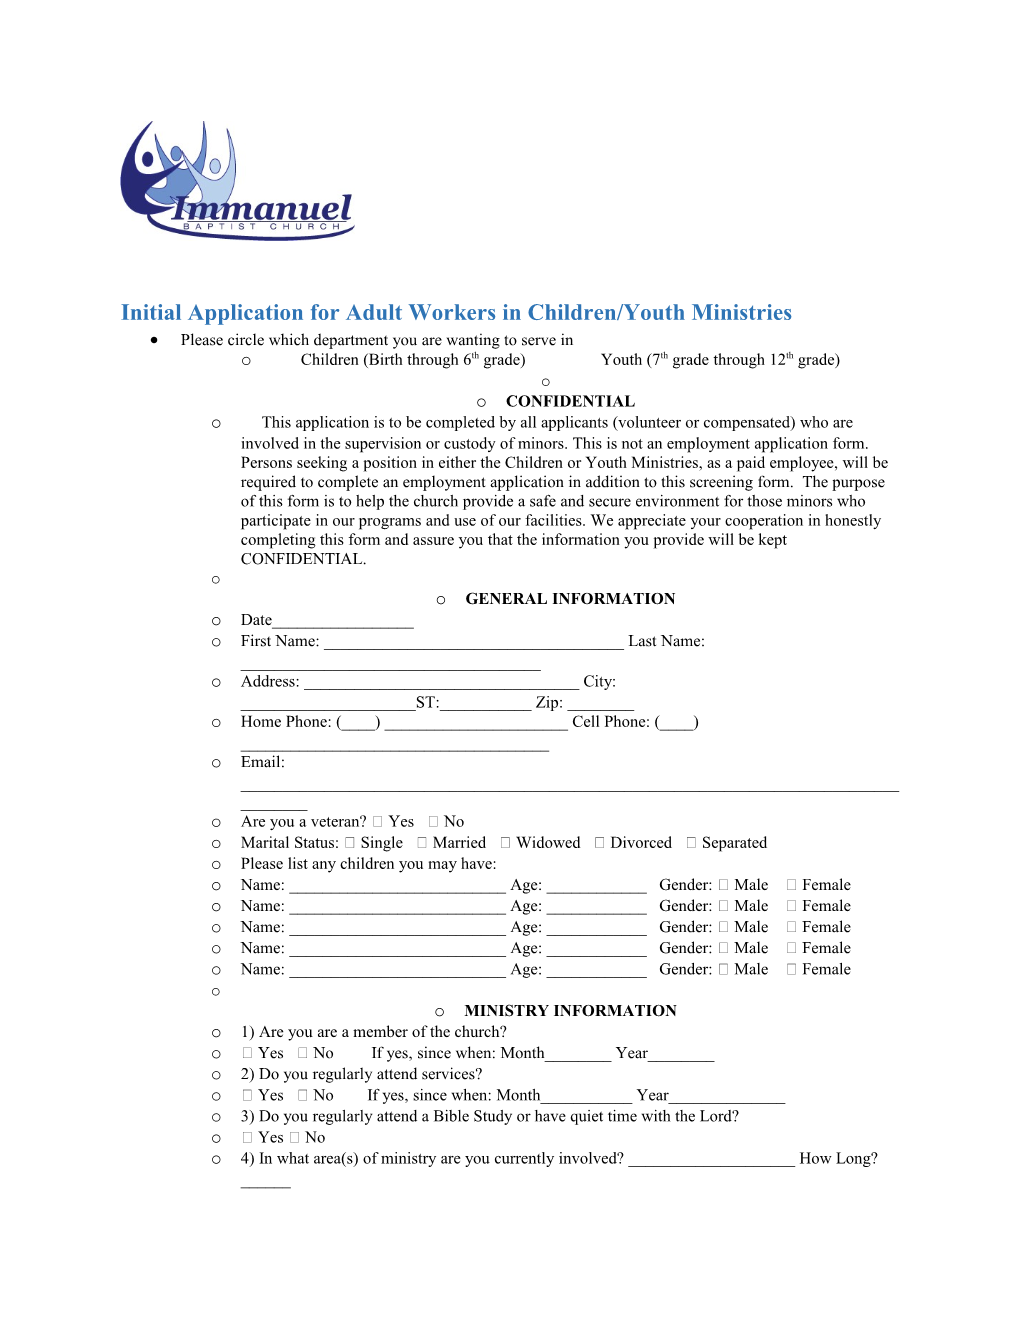 Initialapplication for Adult Workers in Children/Youth Ministries